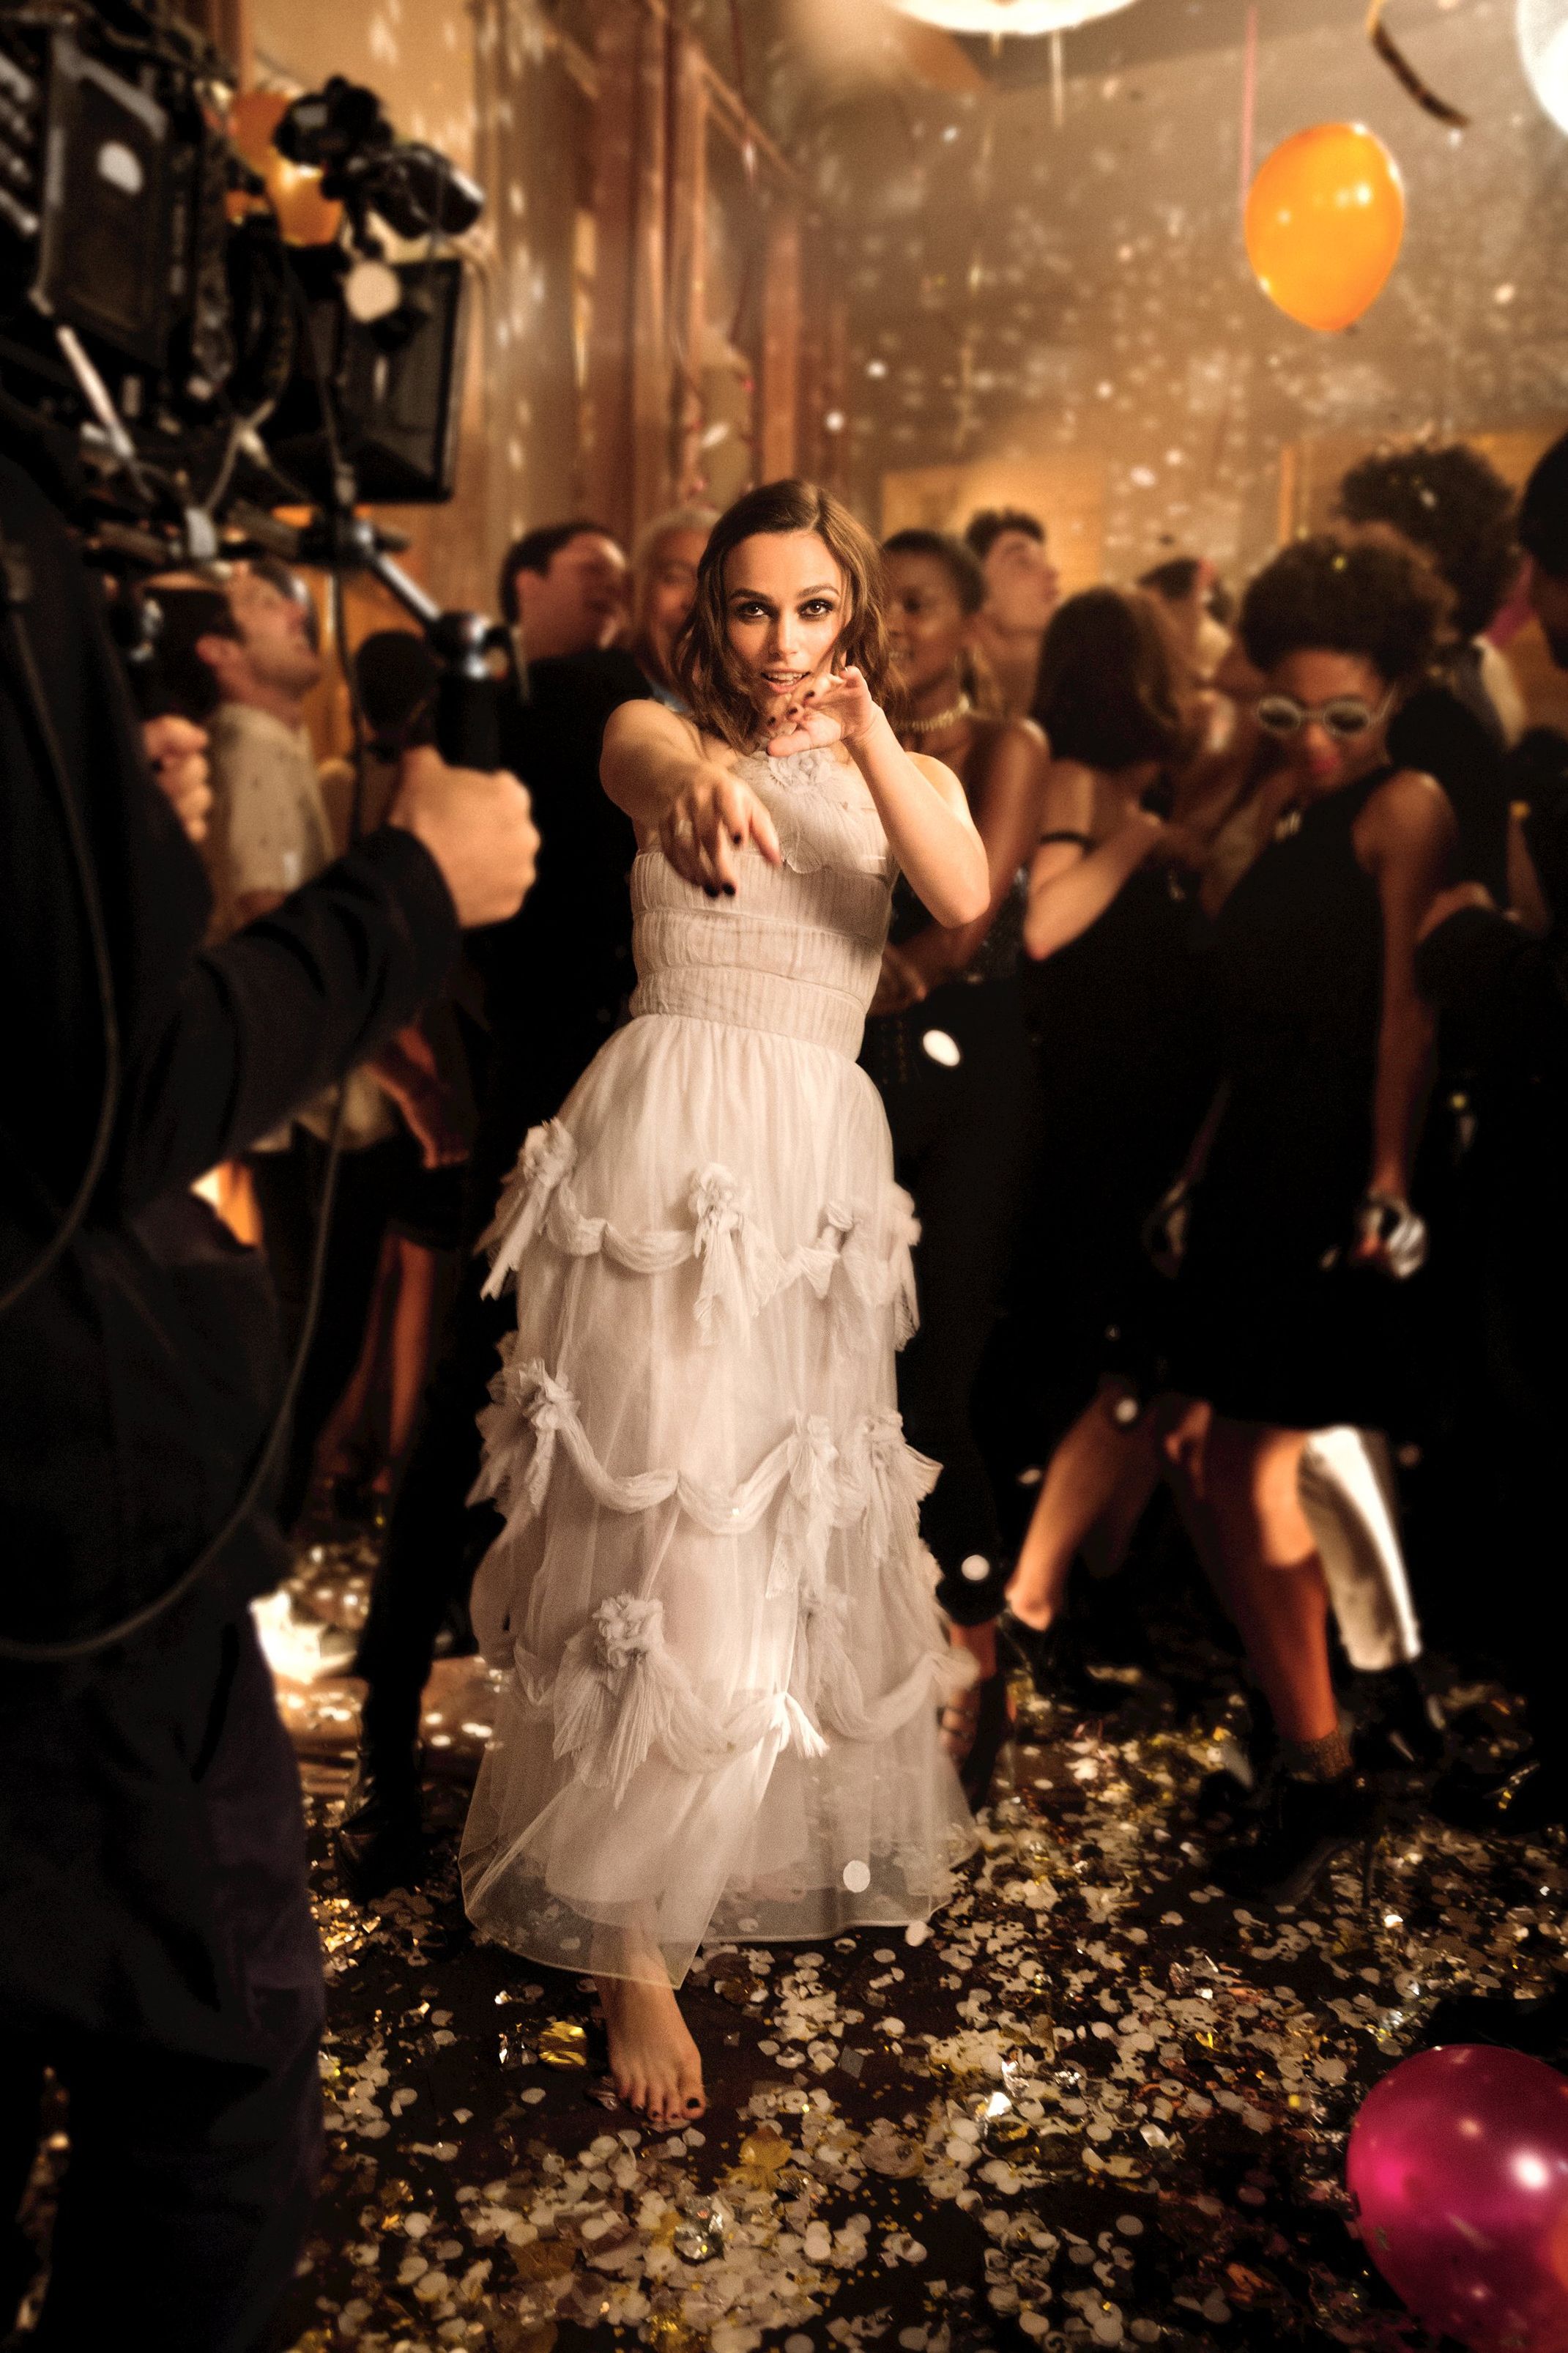 Keira Knightley Stars in New Chanel Ad Video